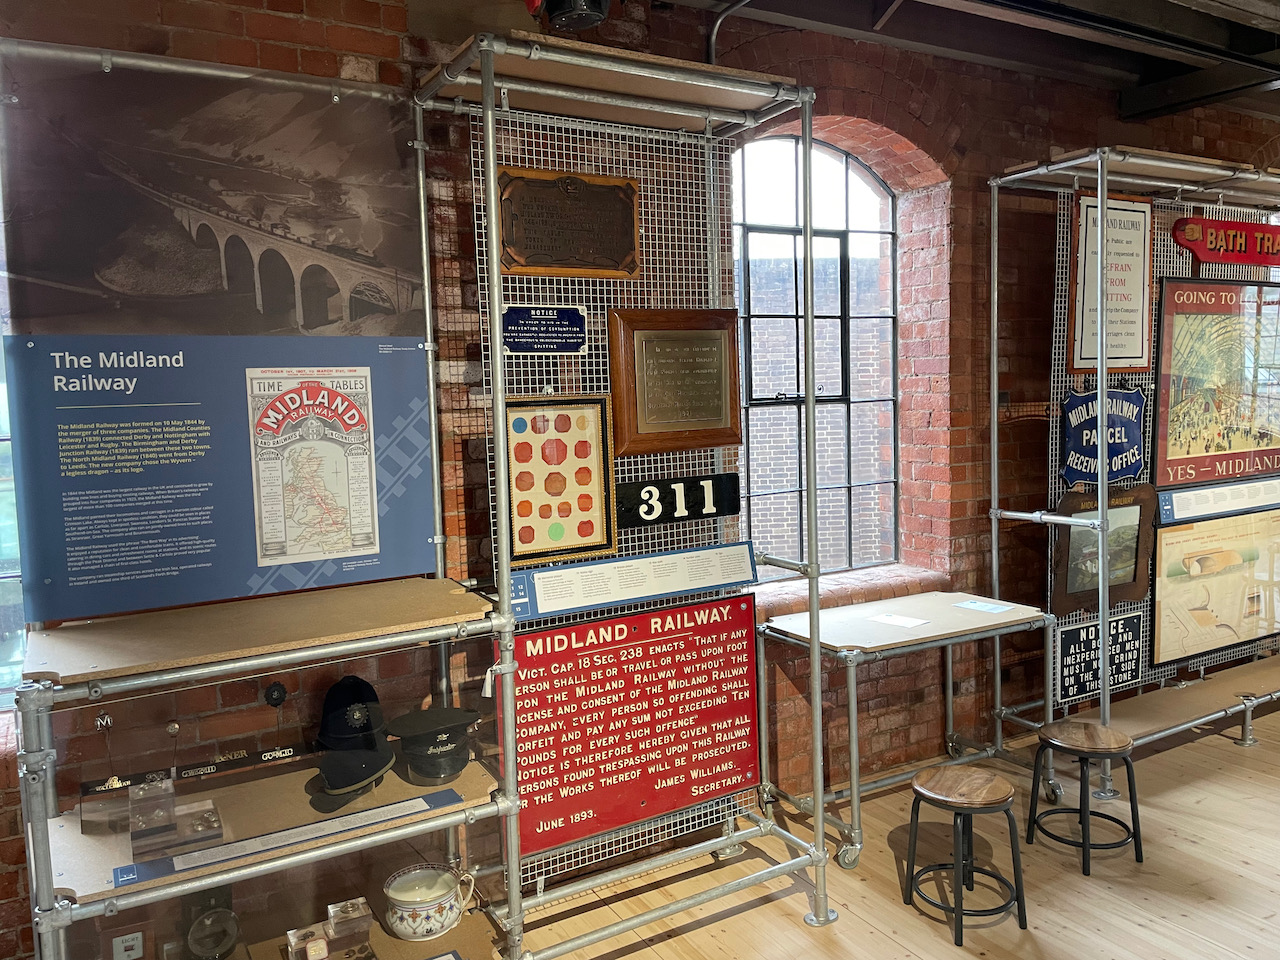 A view of the displays in the Railways Revealed gallery of the Museum of Mking in  Derby's Silk Mill. The plaque to Newton Hibbert is on prominent display